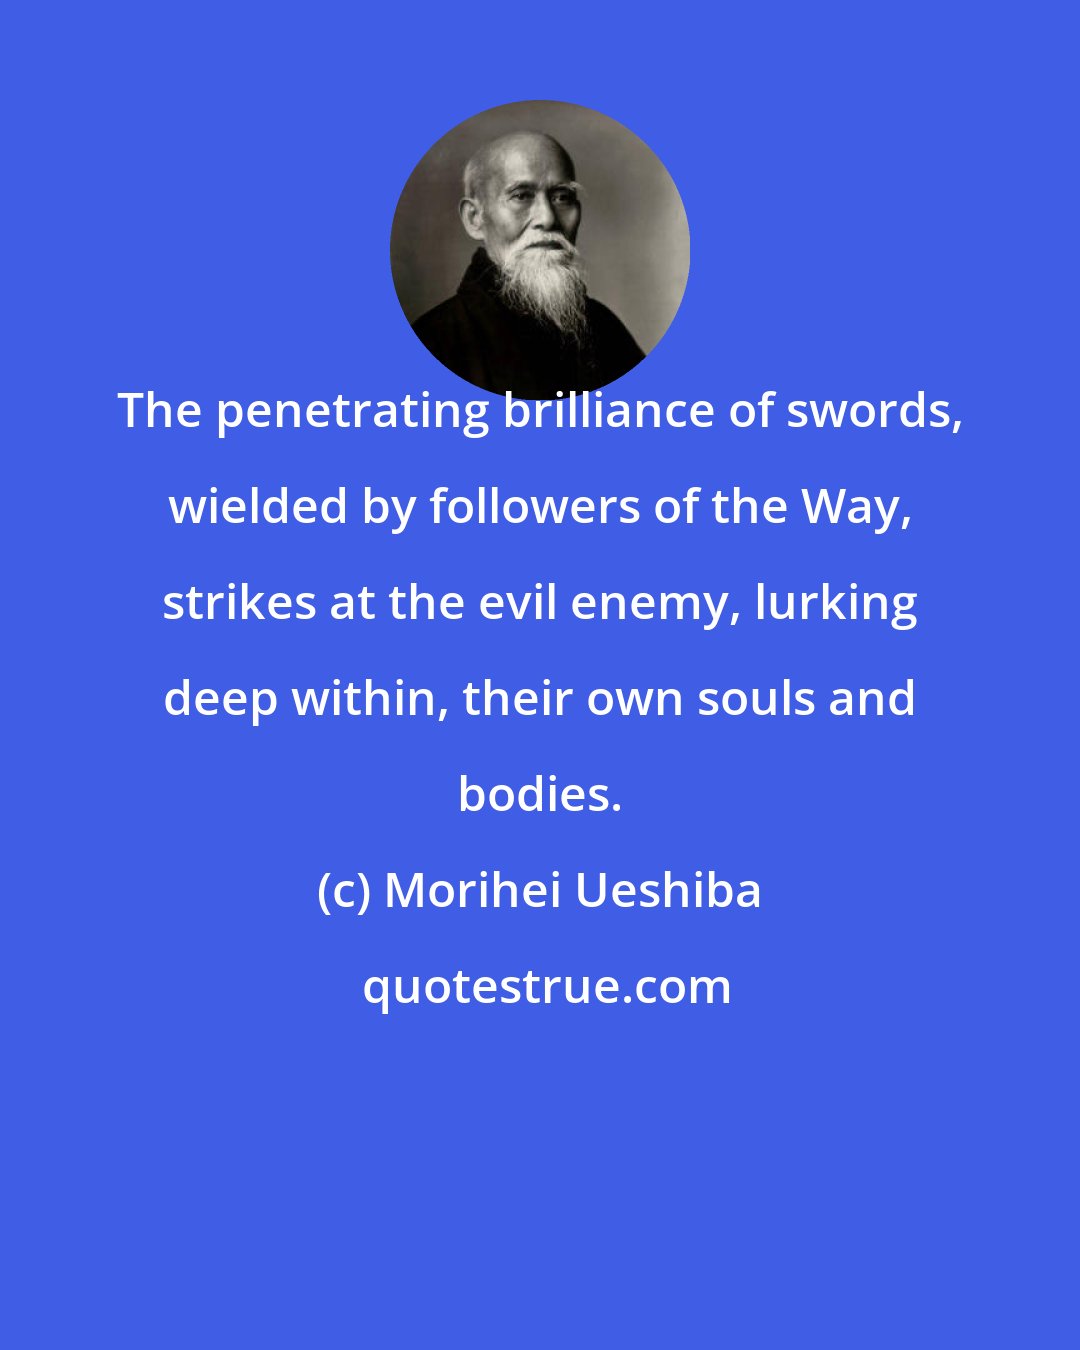 Morihei Ueshiba: The penetrating brilliance of swords, wielded by followers of the Way, strikes at the evil enemy, lurking deep within, their own souls and bodies.